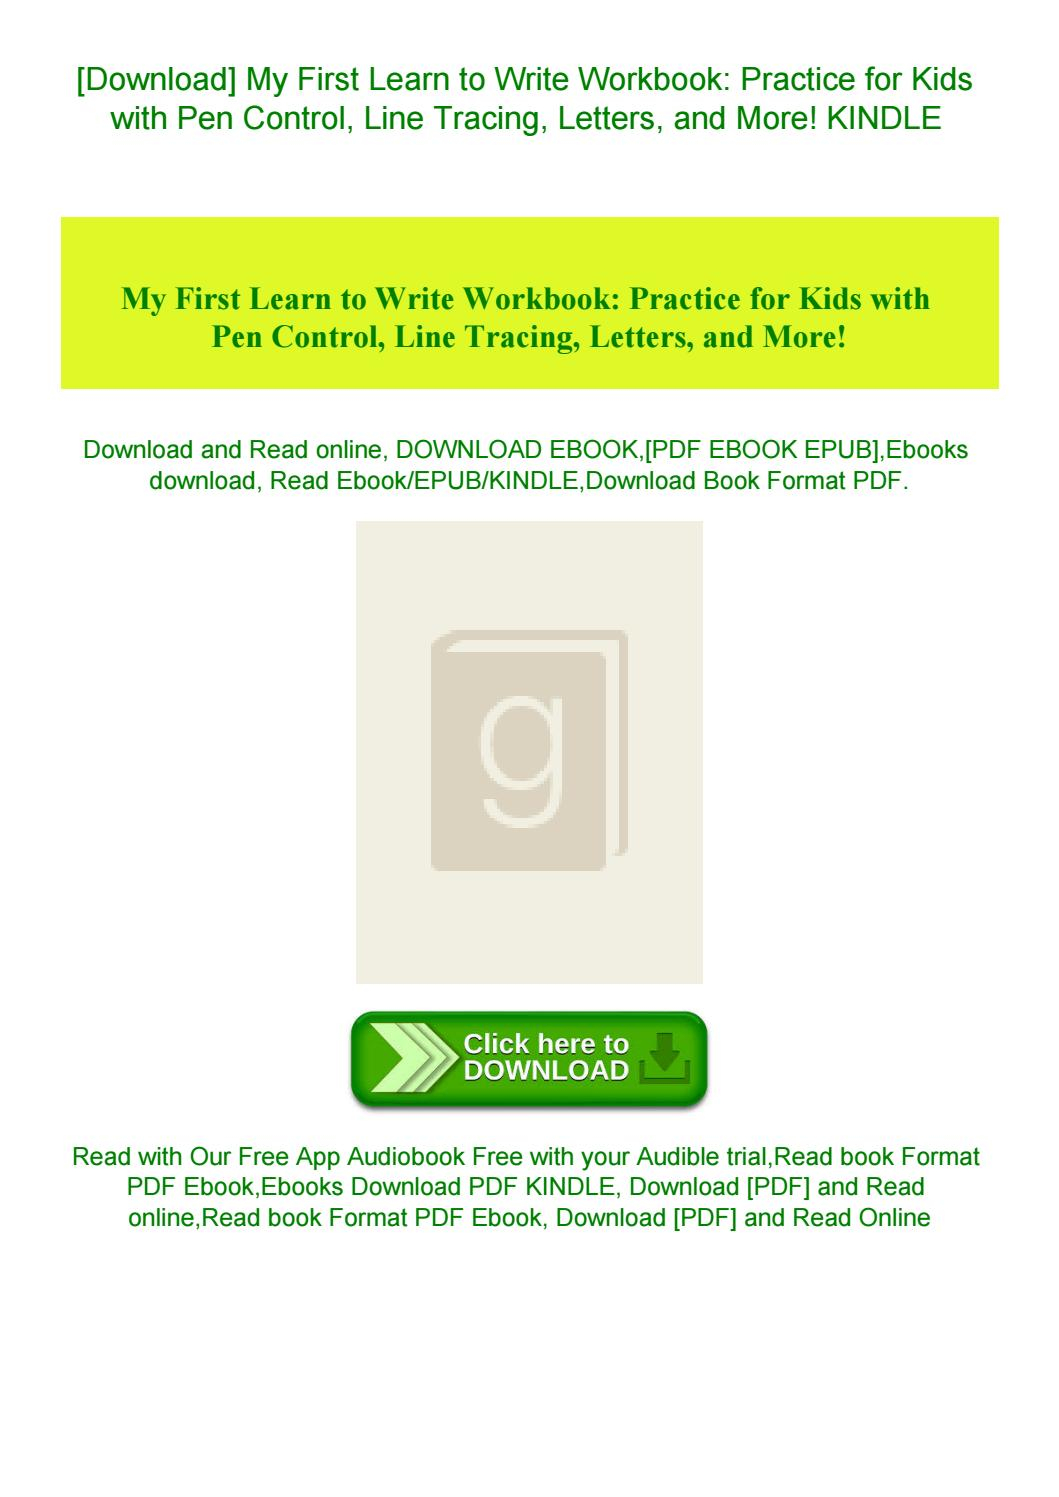 Download] My First Learn To Write Workbook Practice For Kids